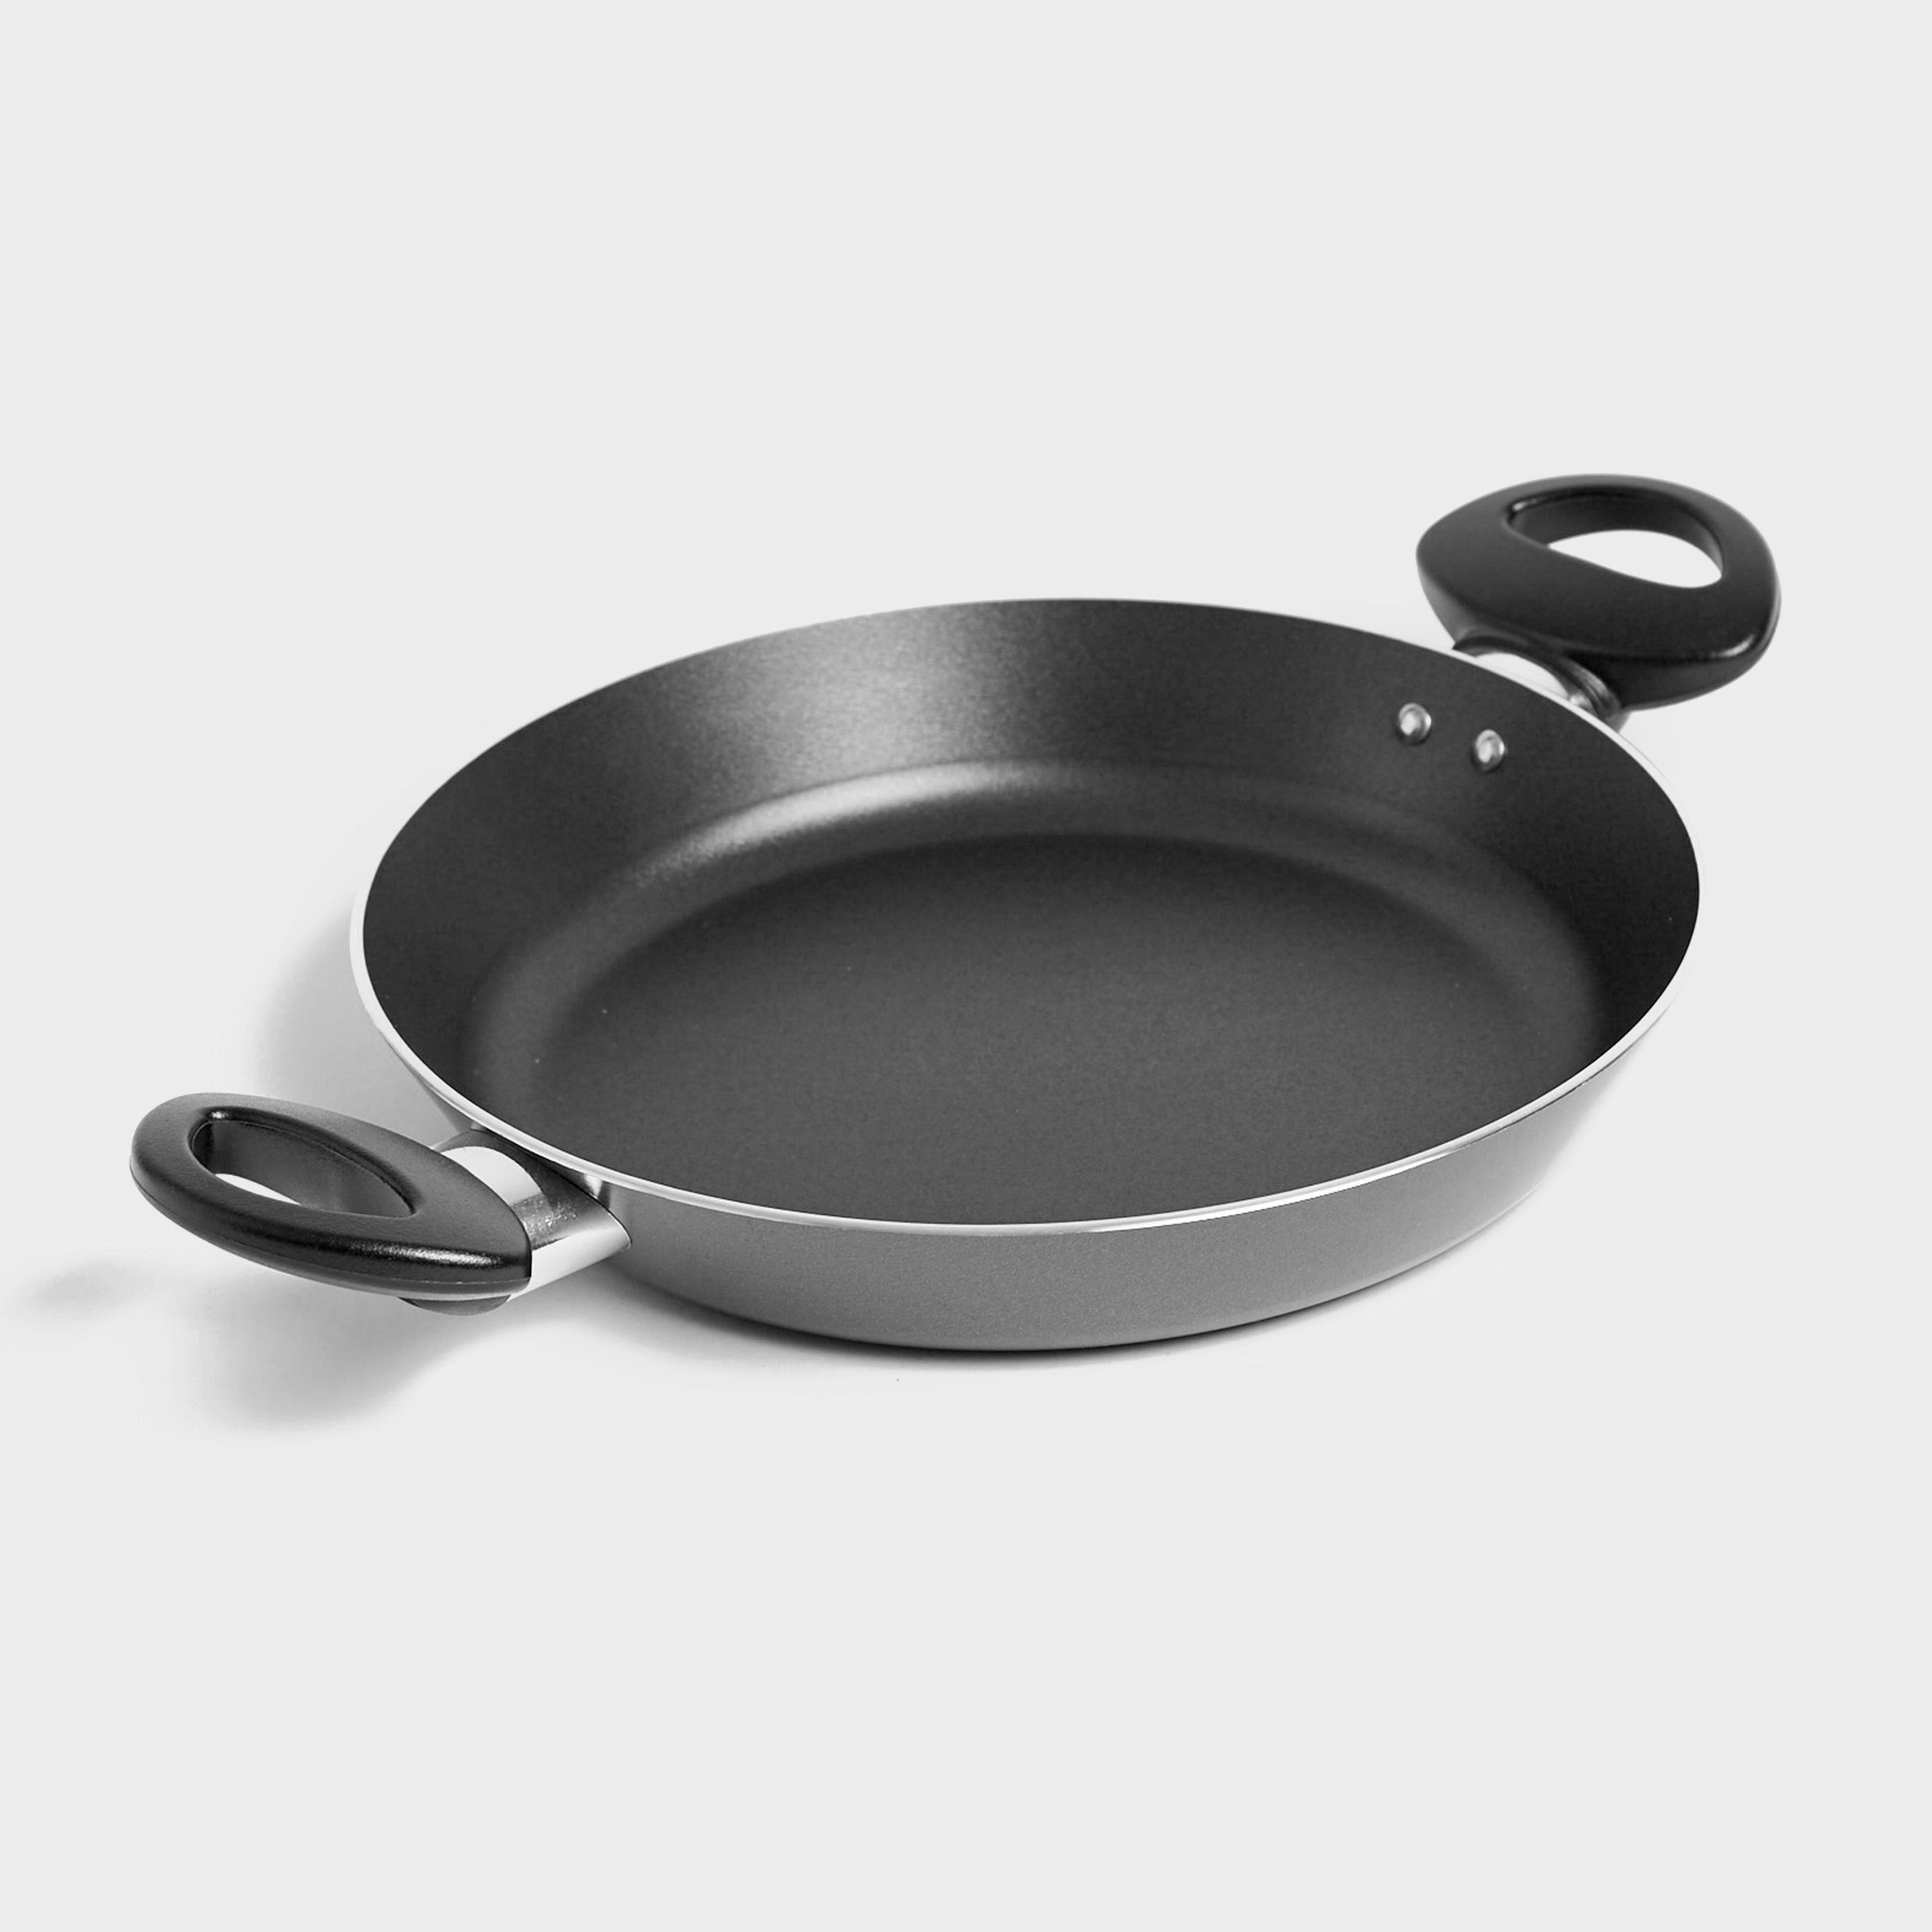 Photos - Other Camping Utensils Quest Paella Pan 26cm, Silver 